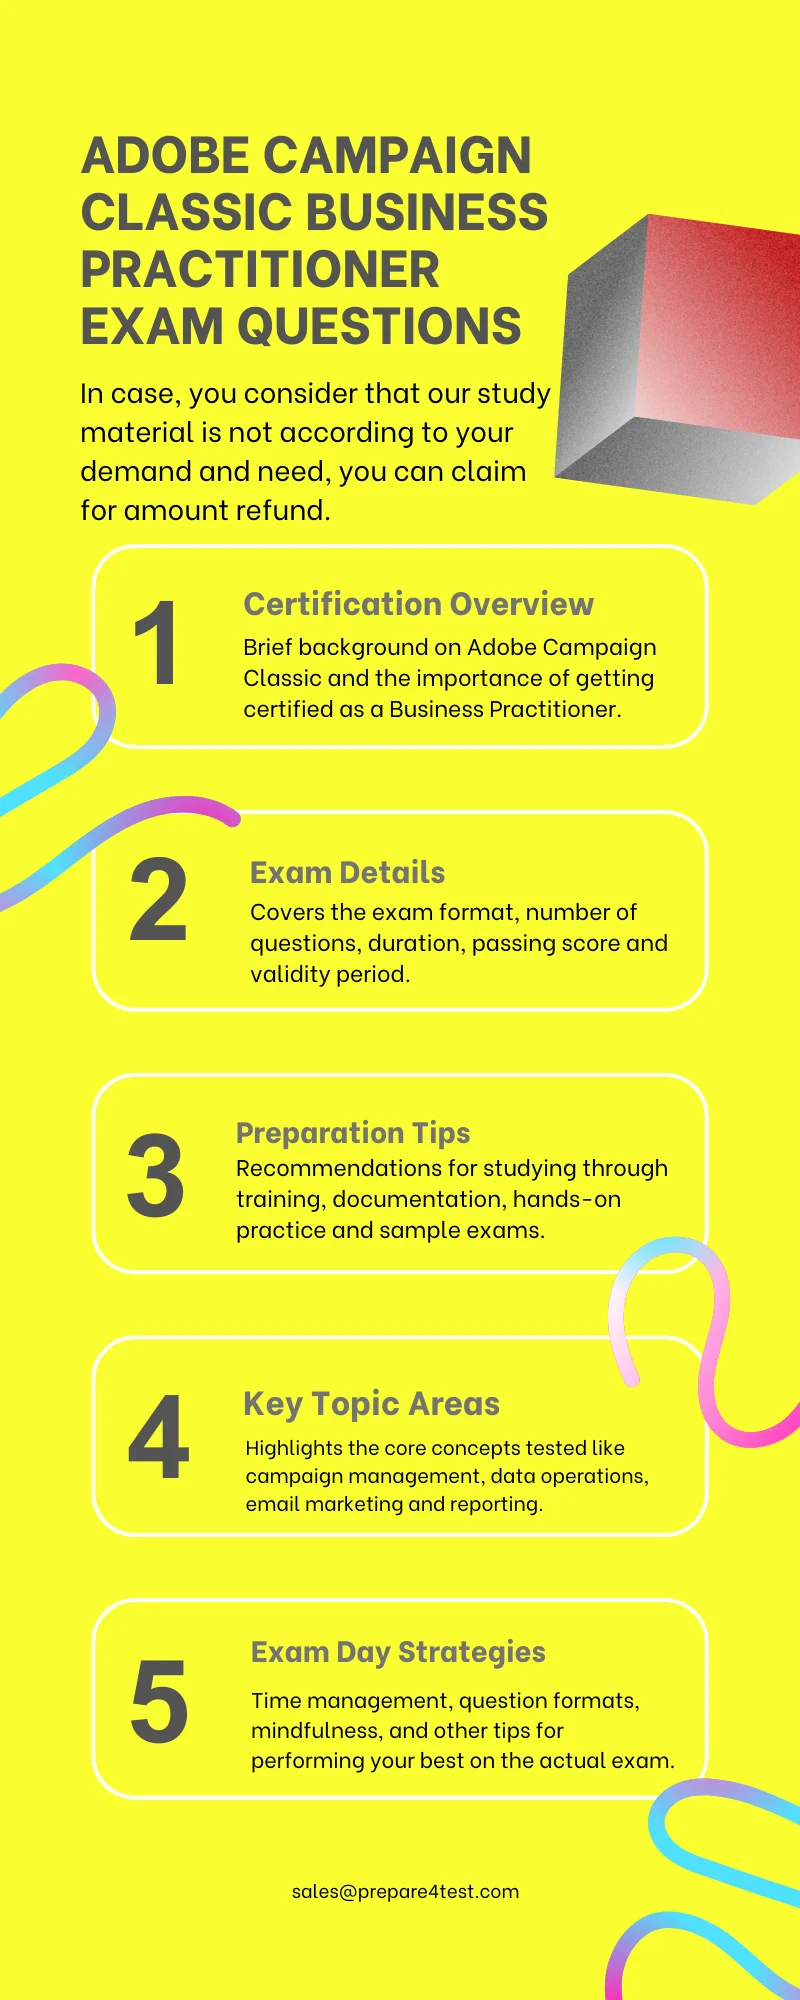 Adobe Campaign Classic Business Practitioner Exam Questions Infographic